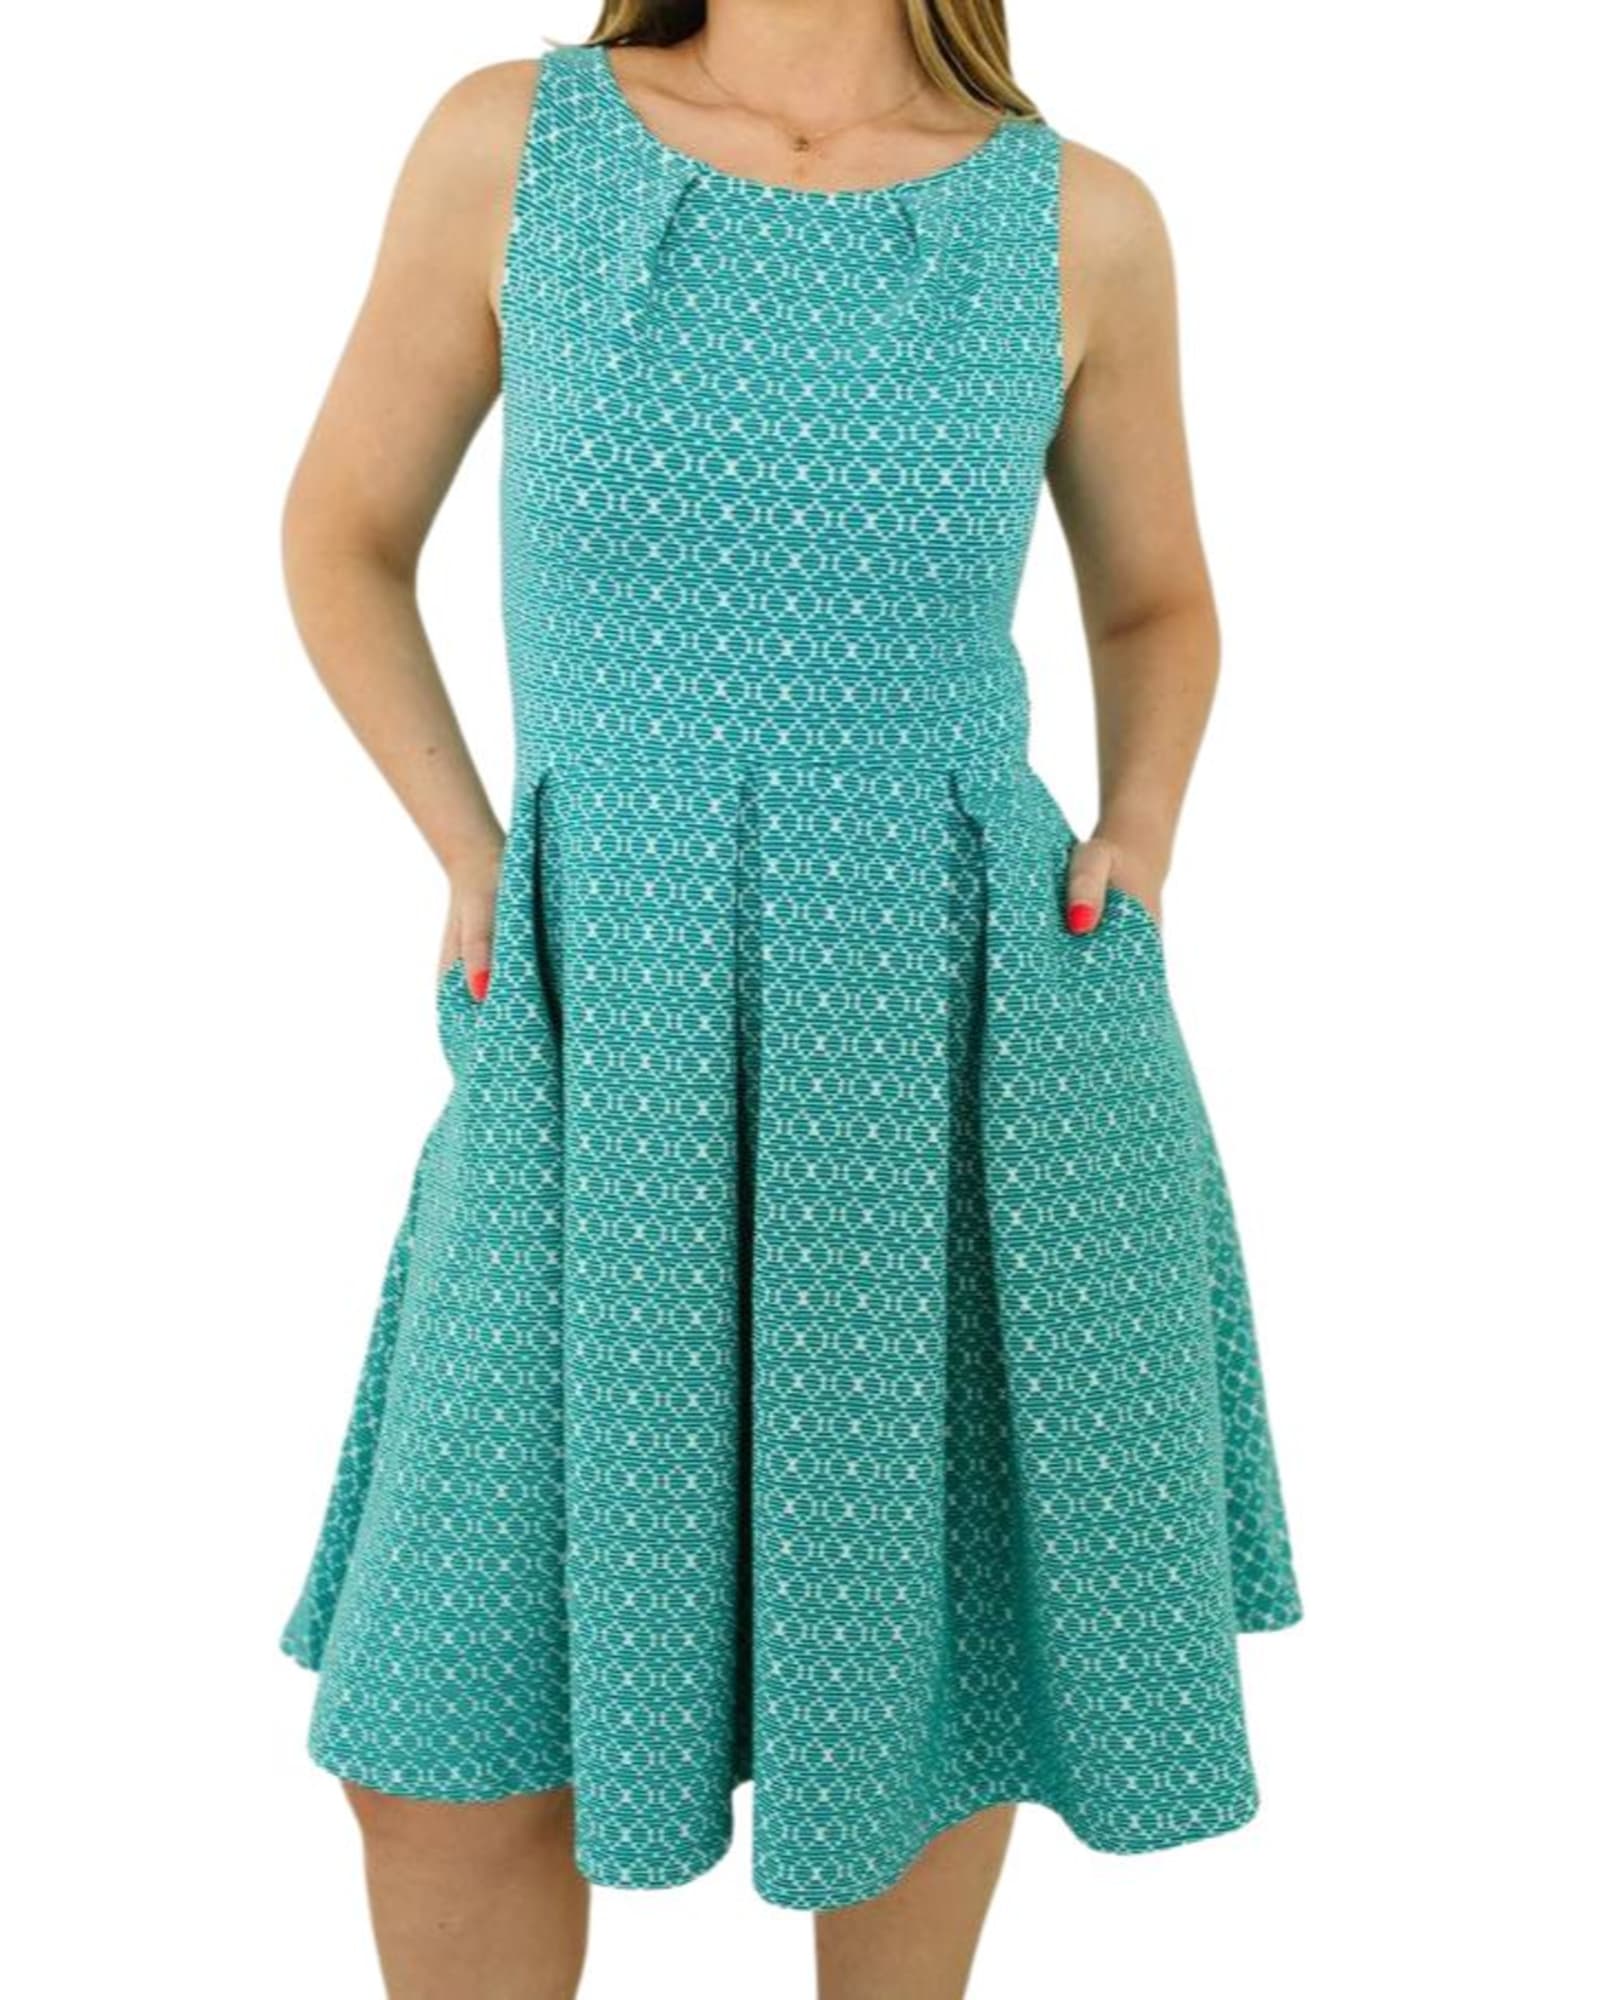 Anita Fit-And-Flare Dress in Turquoise | Turquoise